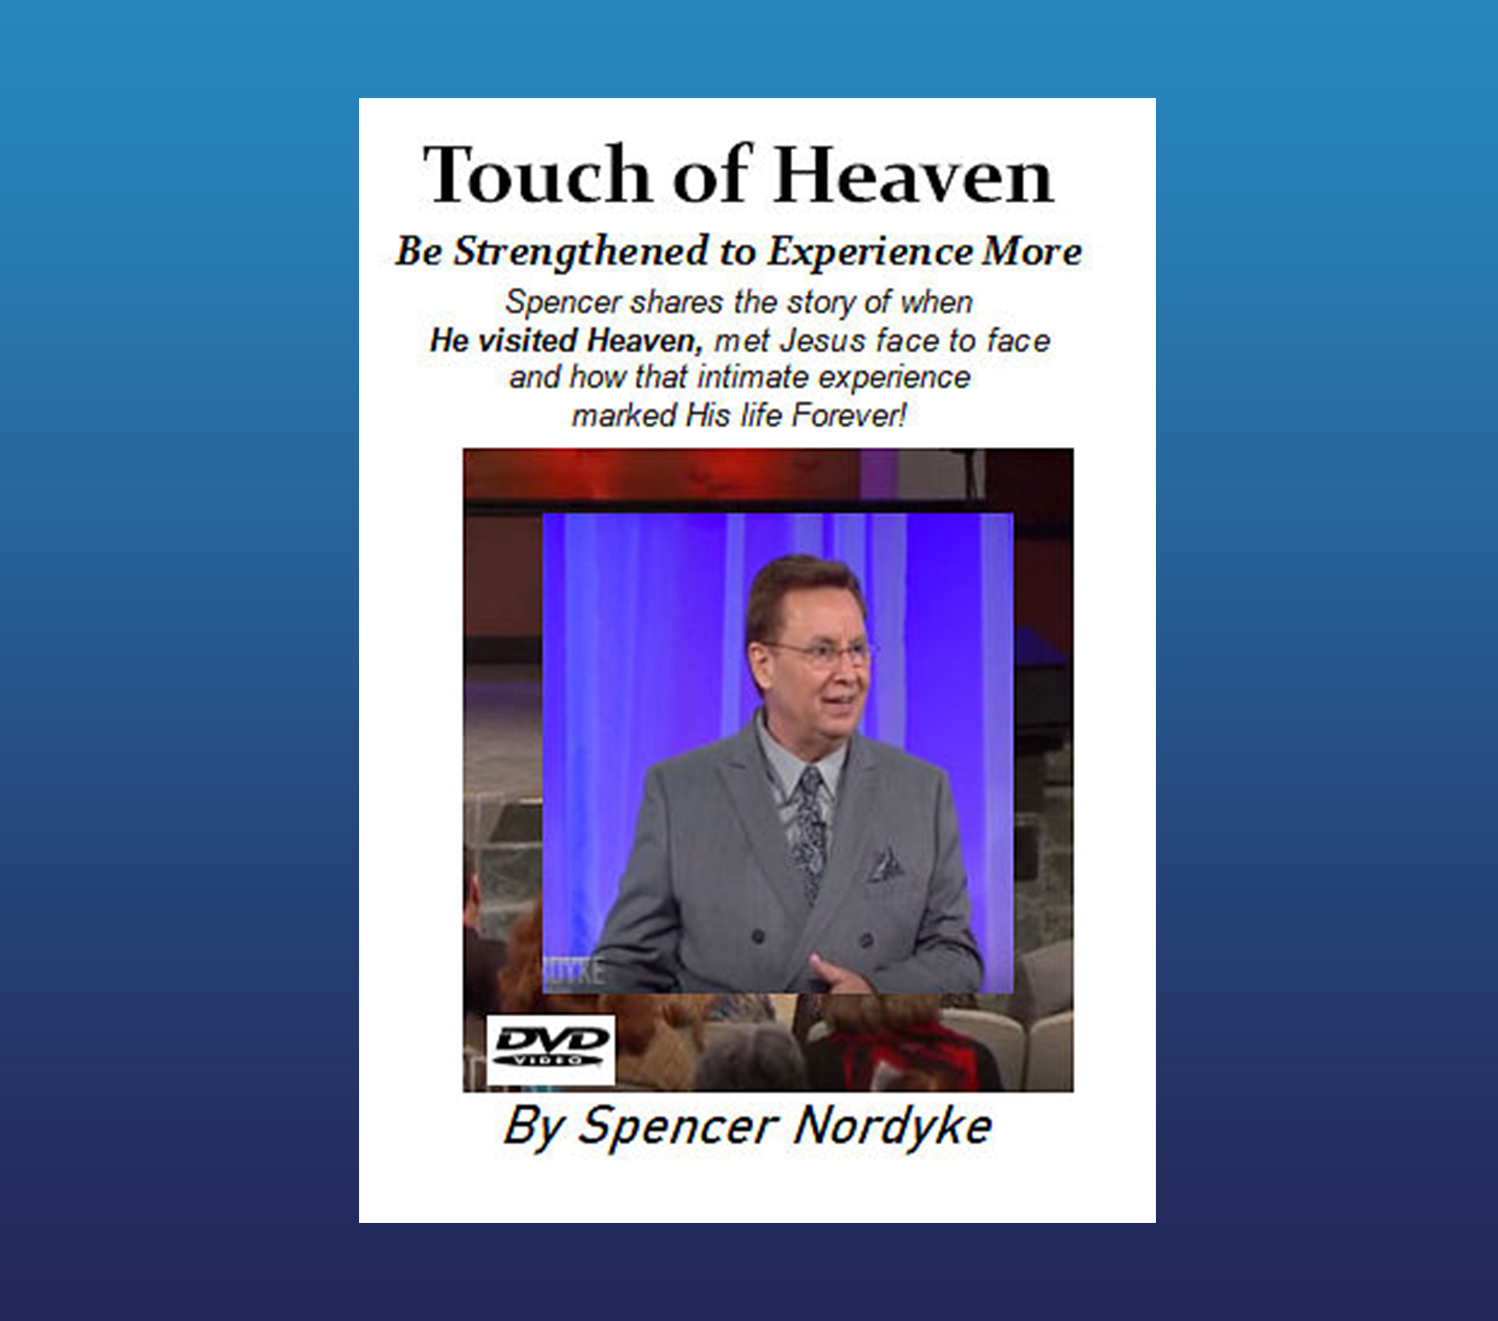 Touch of Heaven  DVD